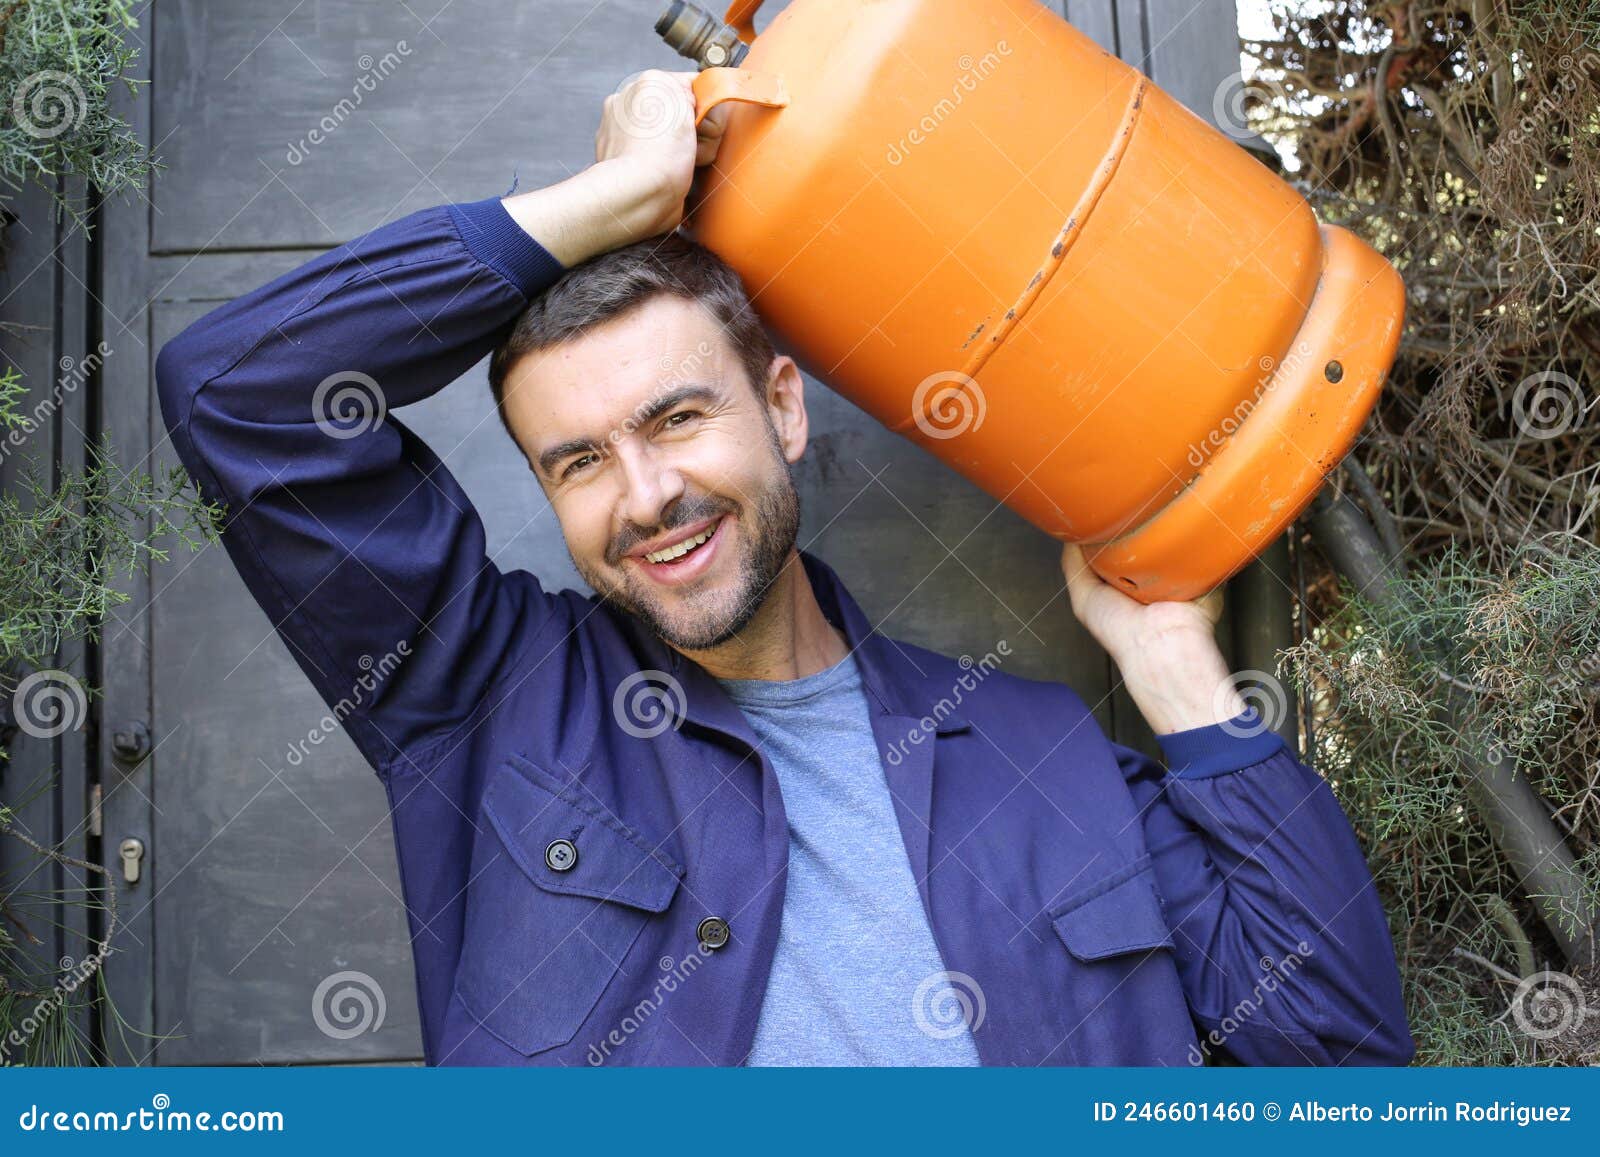 propane tank delivery man with attractive look